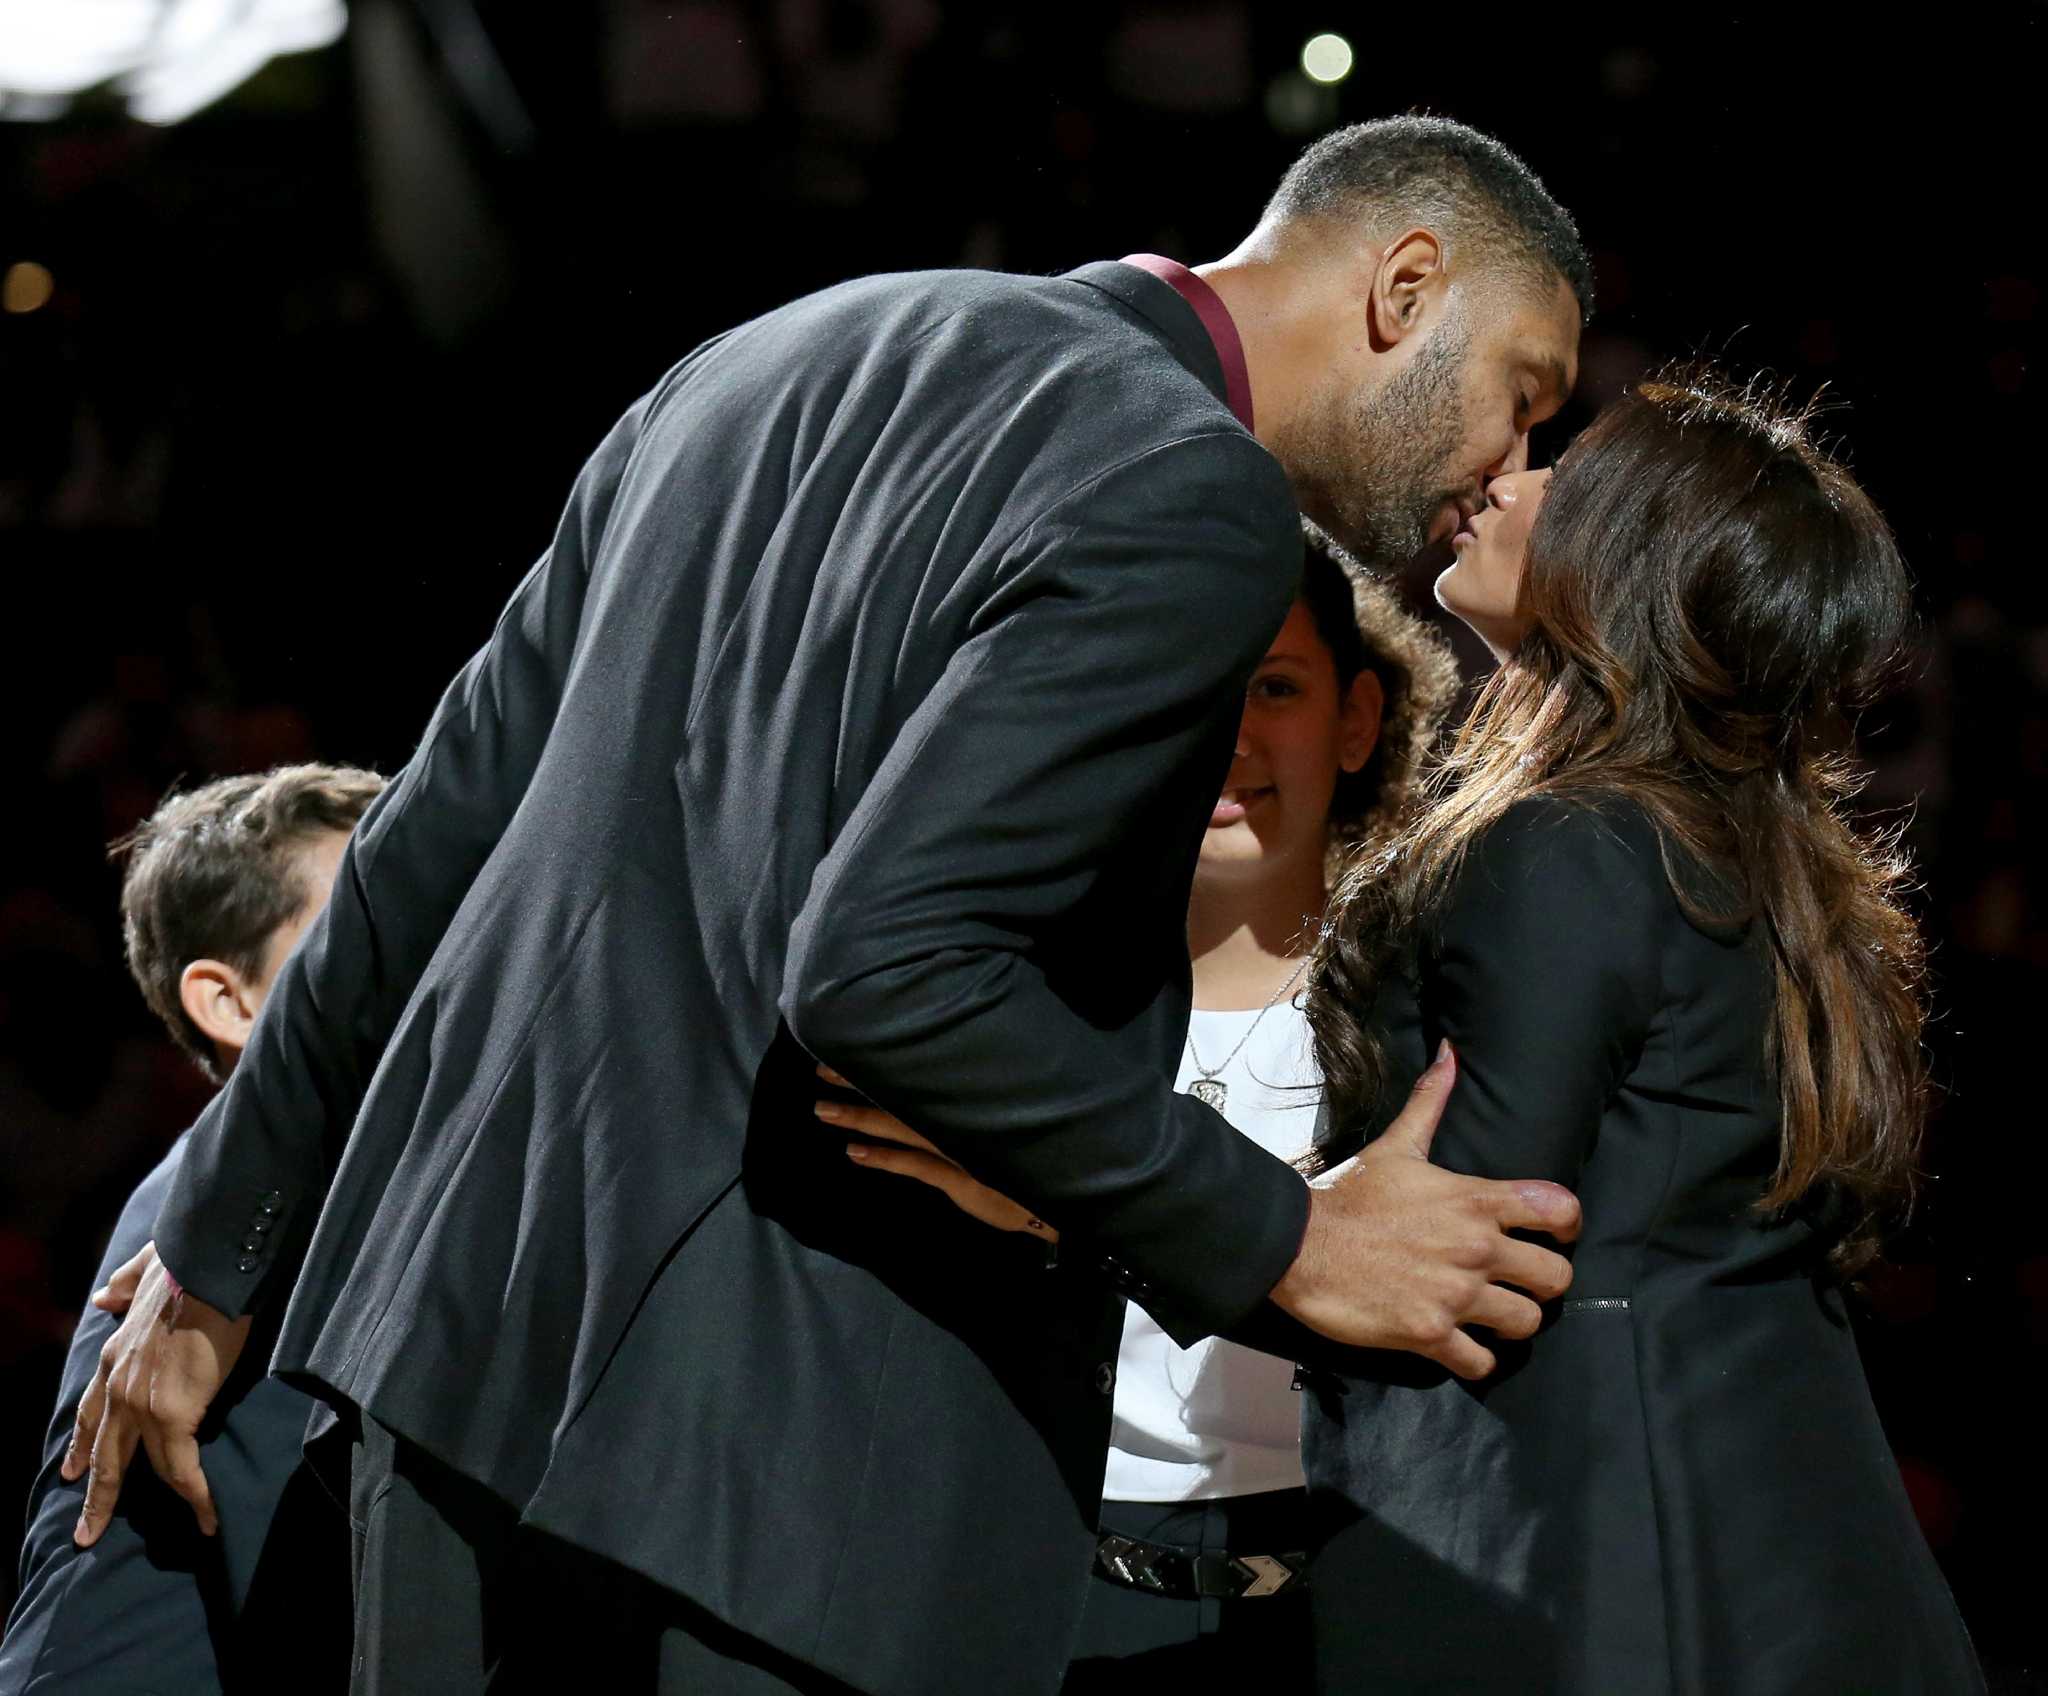 Tim Duncan, Vanessa Macias just had a baby girl, named her after character